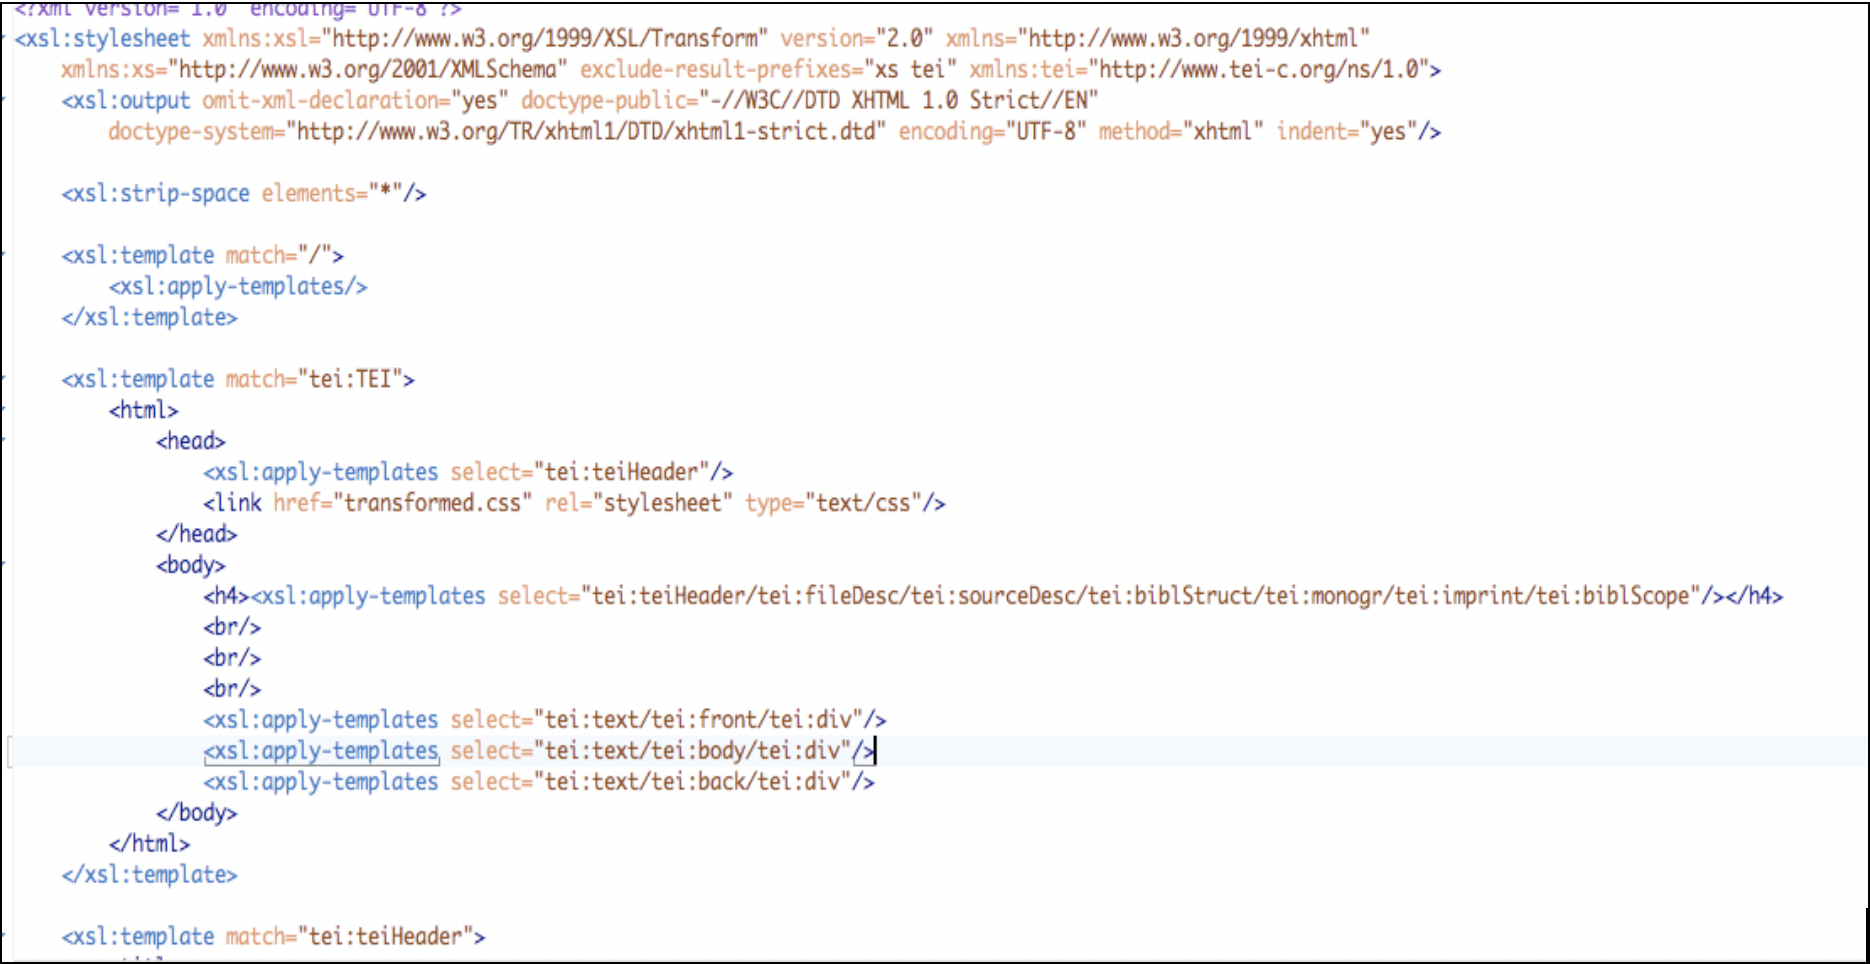 A screen shot of the xslt used to transform xml into html.